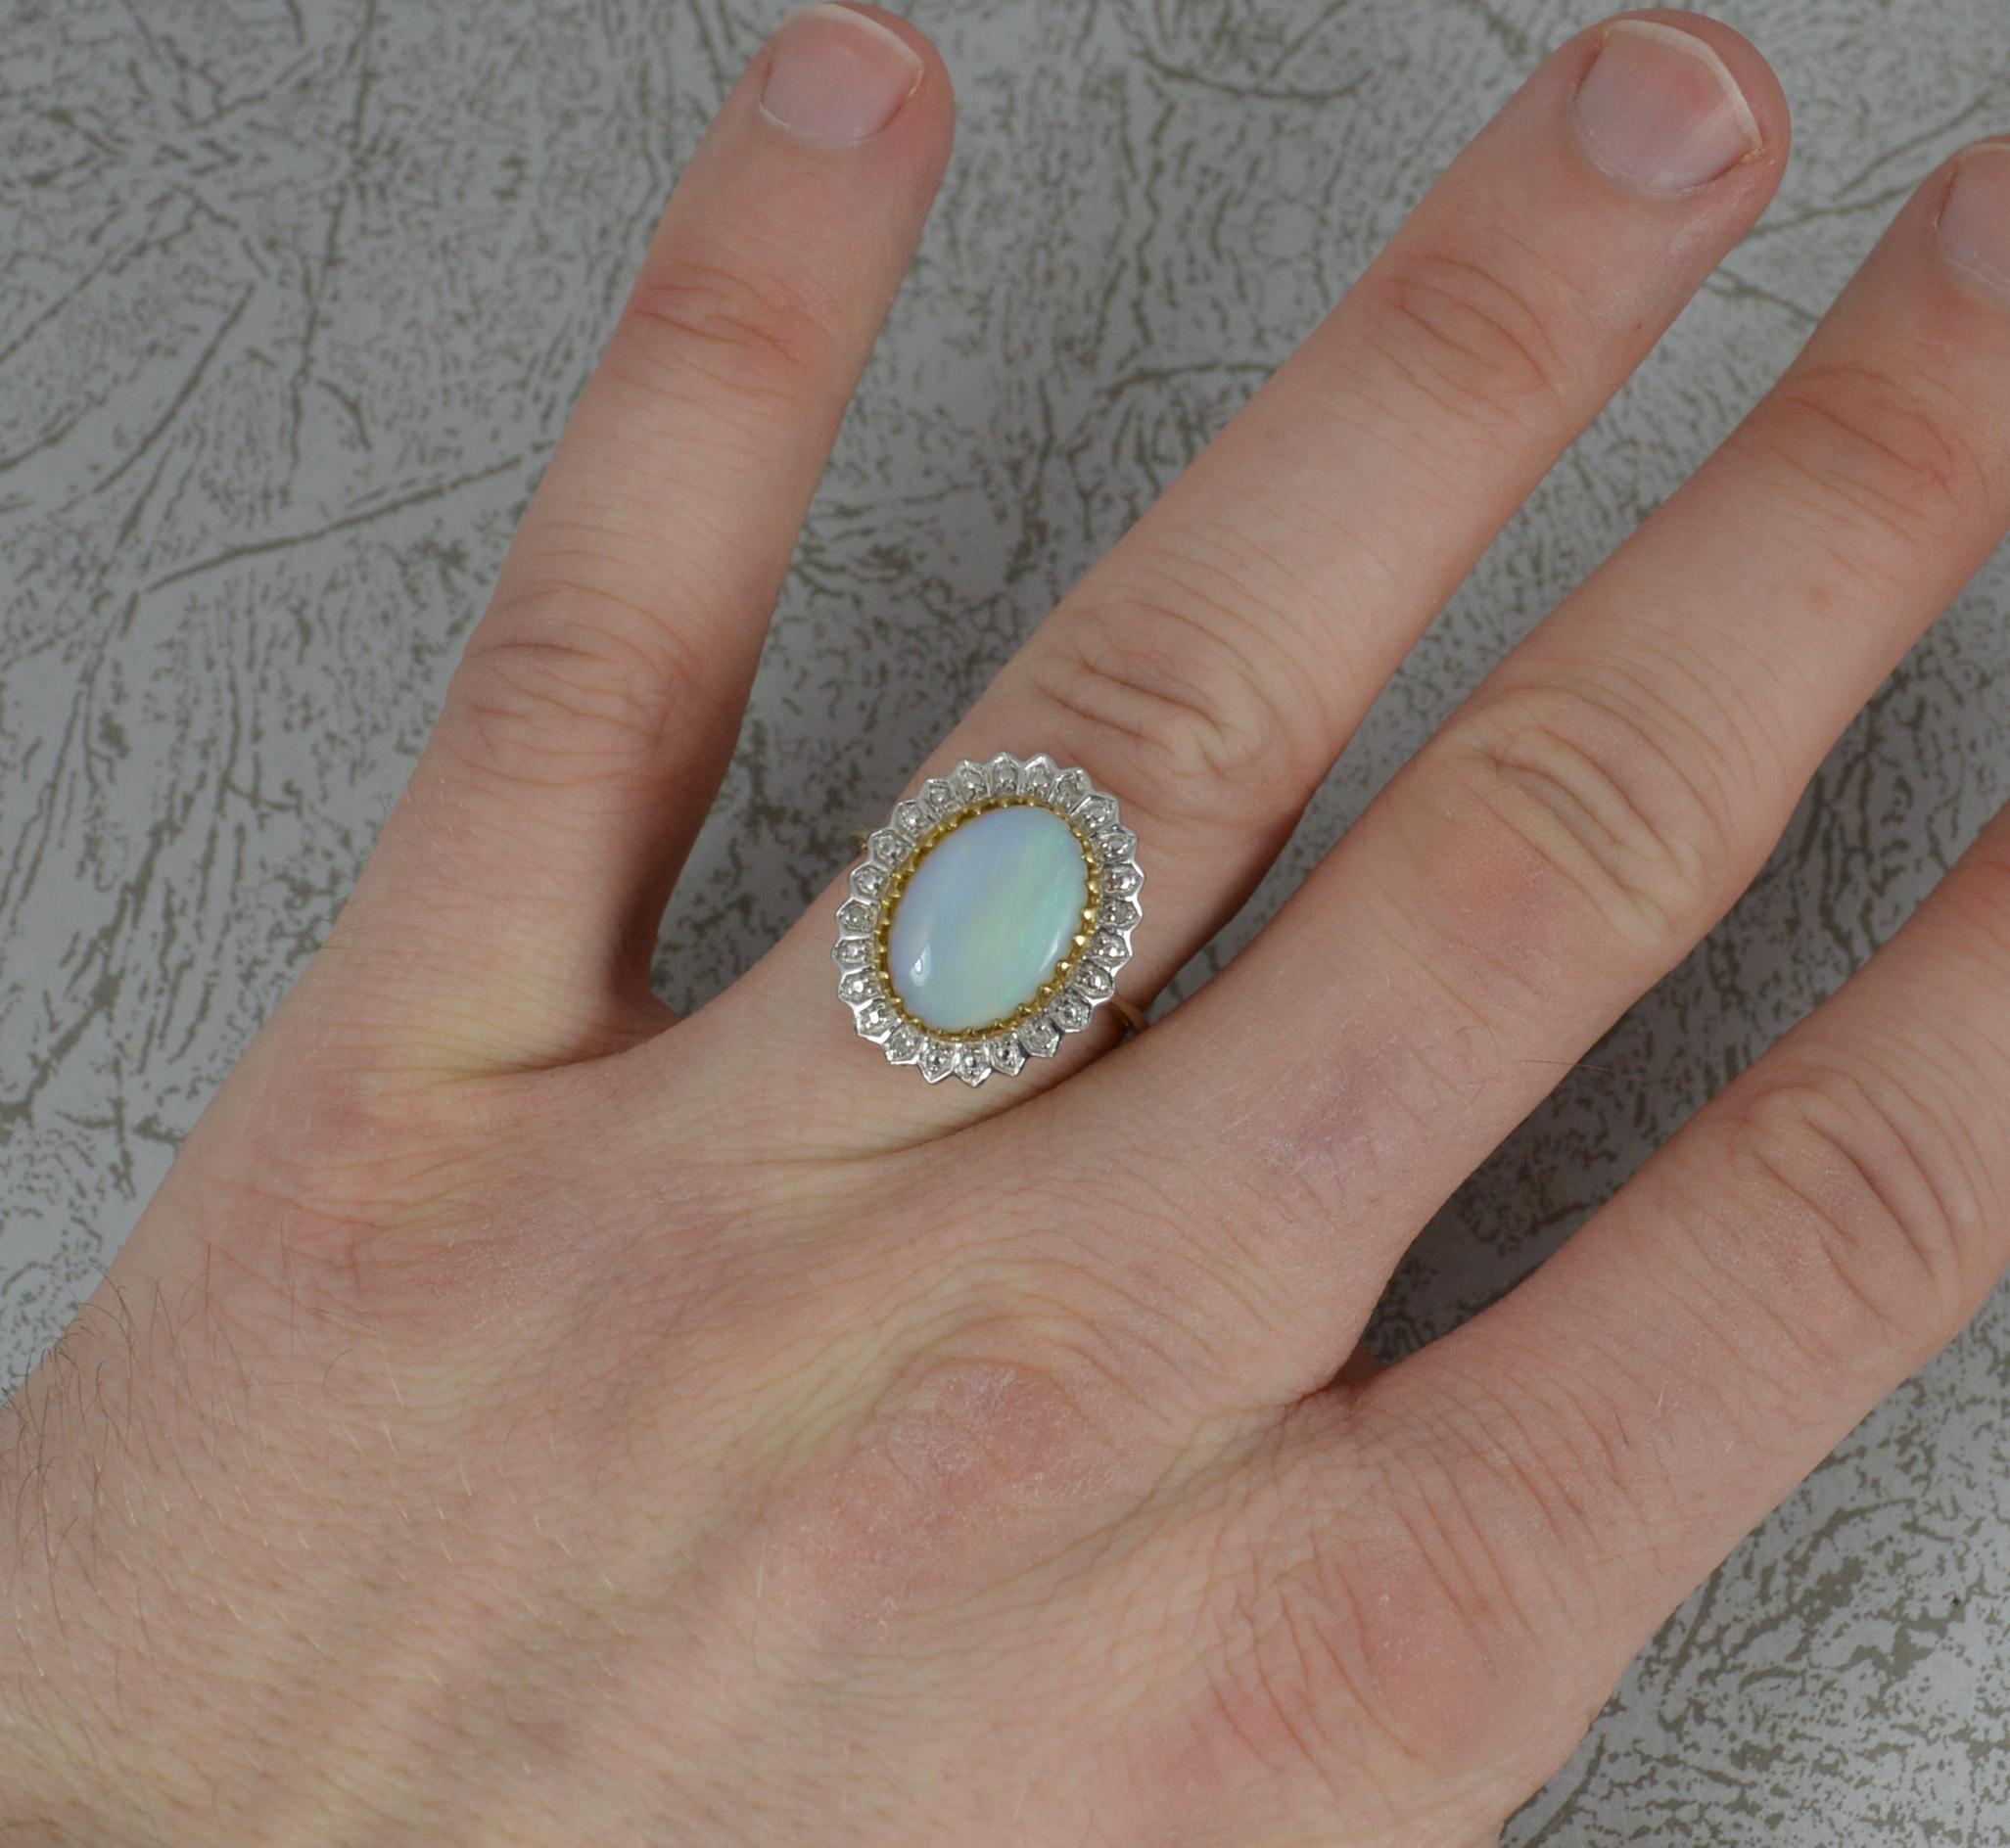 A fine quality opal, diamond and 9ct gold ring.
9 carat yellow gold head and white gold shank.
Set with an oval opal, 9mm x 13mm approx. Surrounding are small natural round cut diamonds. 15mm x 19mm cluster head.
Simple yet stylish